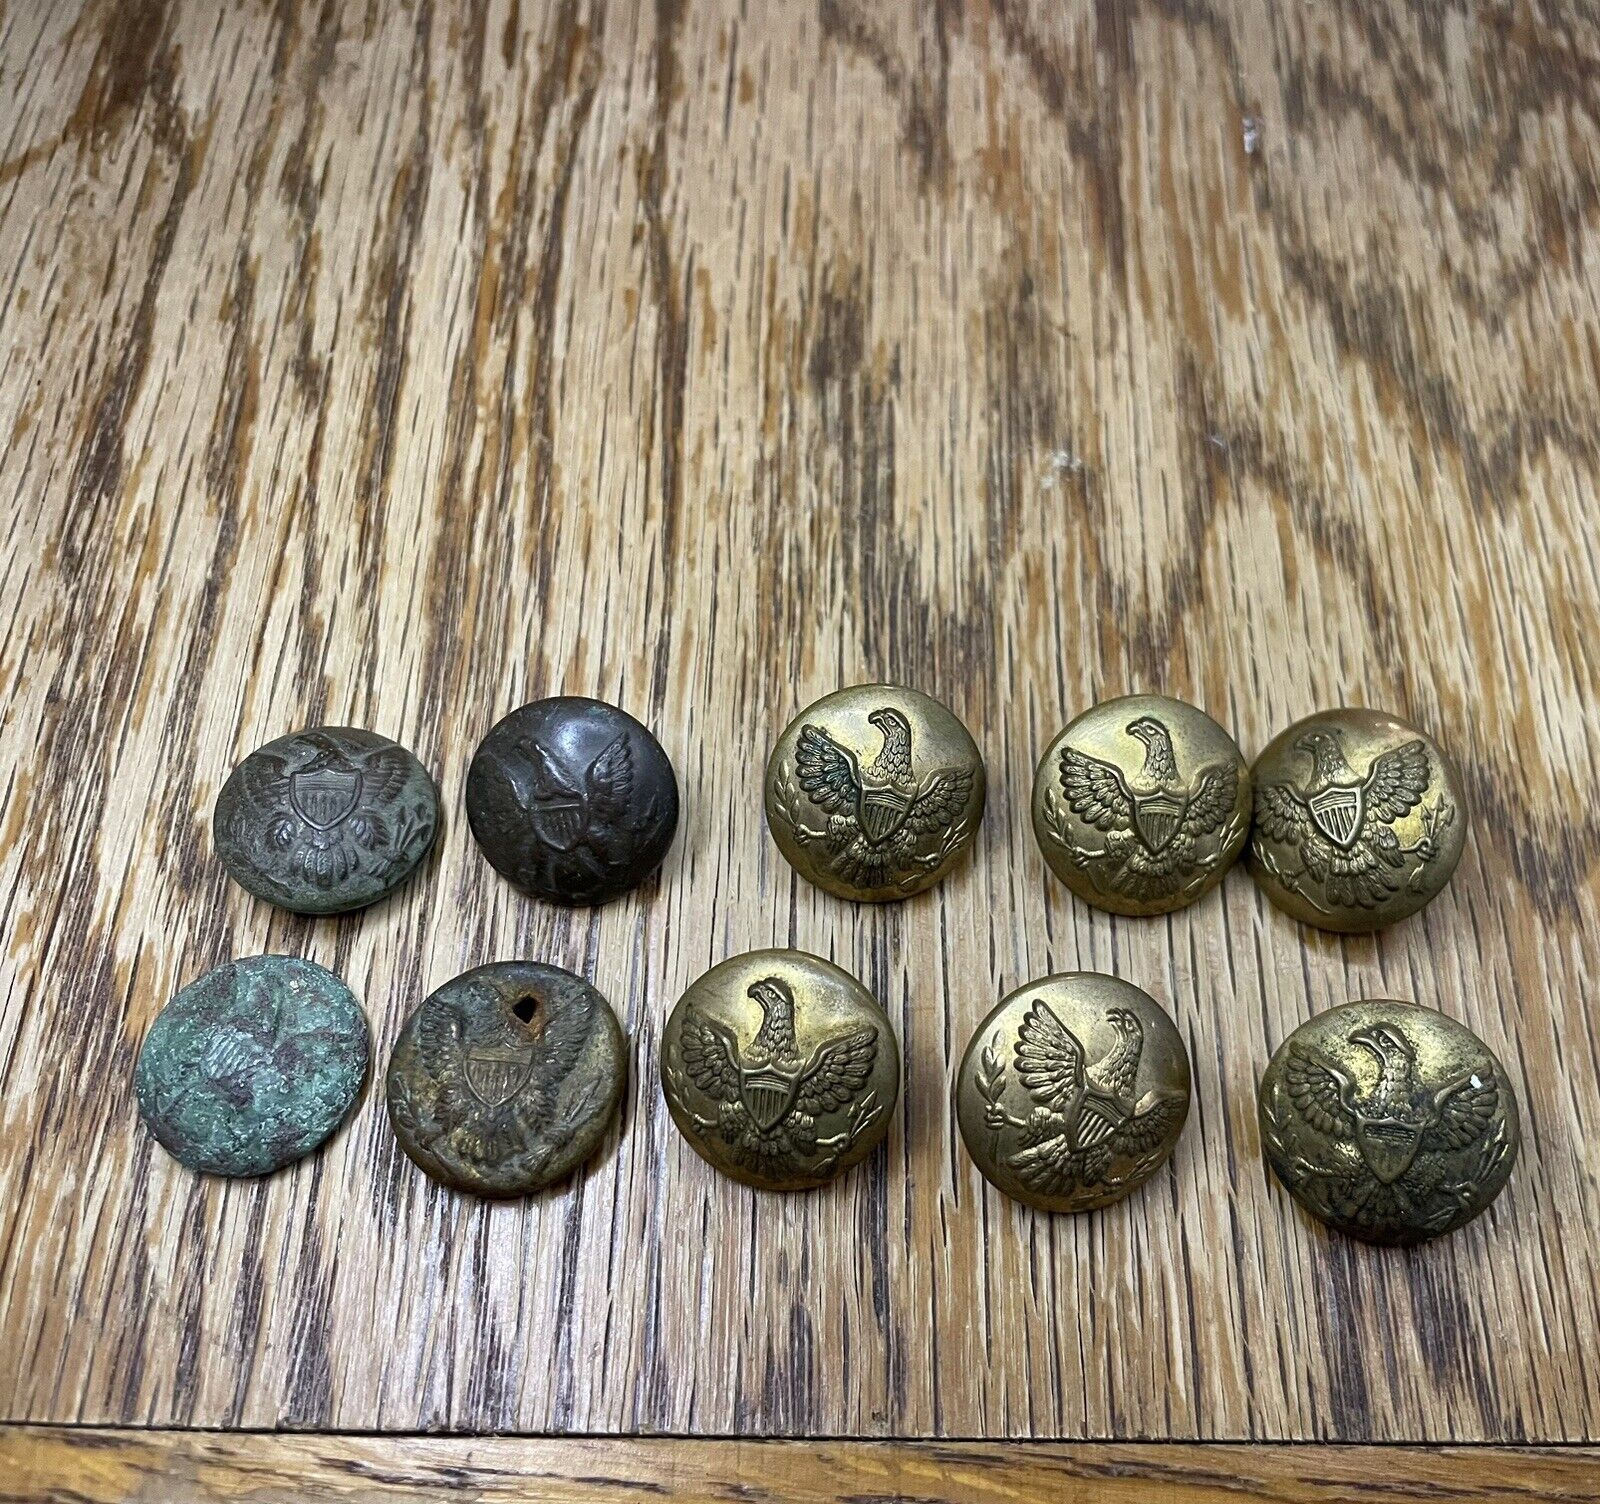 russian military buttons vintage